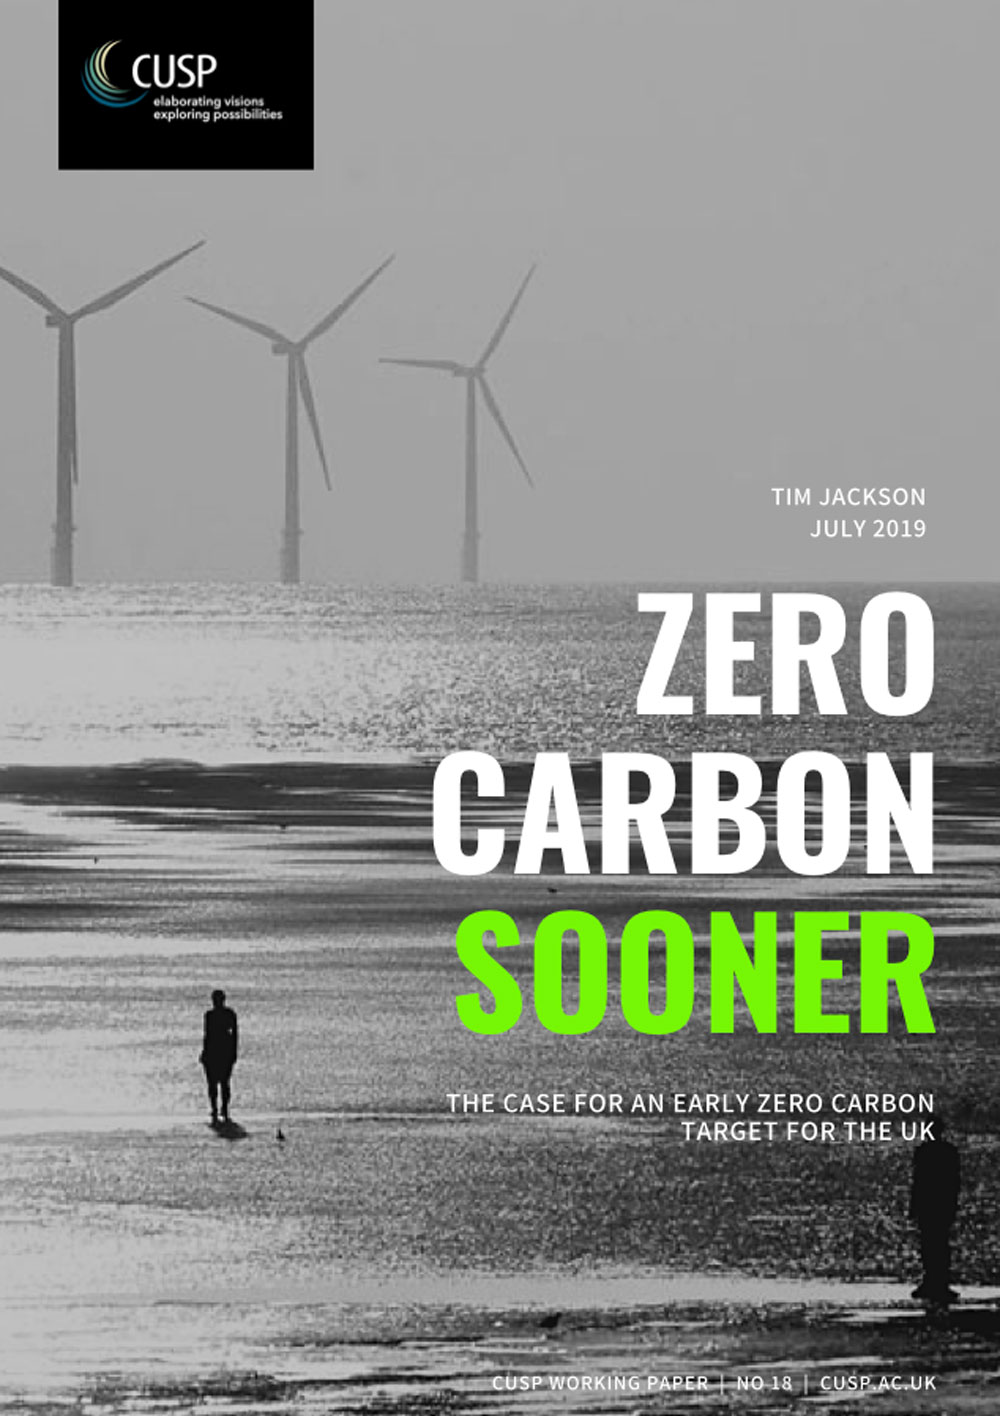 Zero Carbon Sooner —The case for an early zero carbon target for the UK